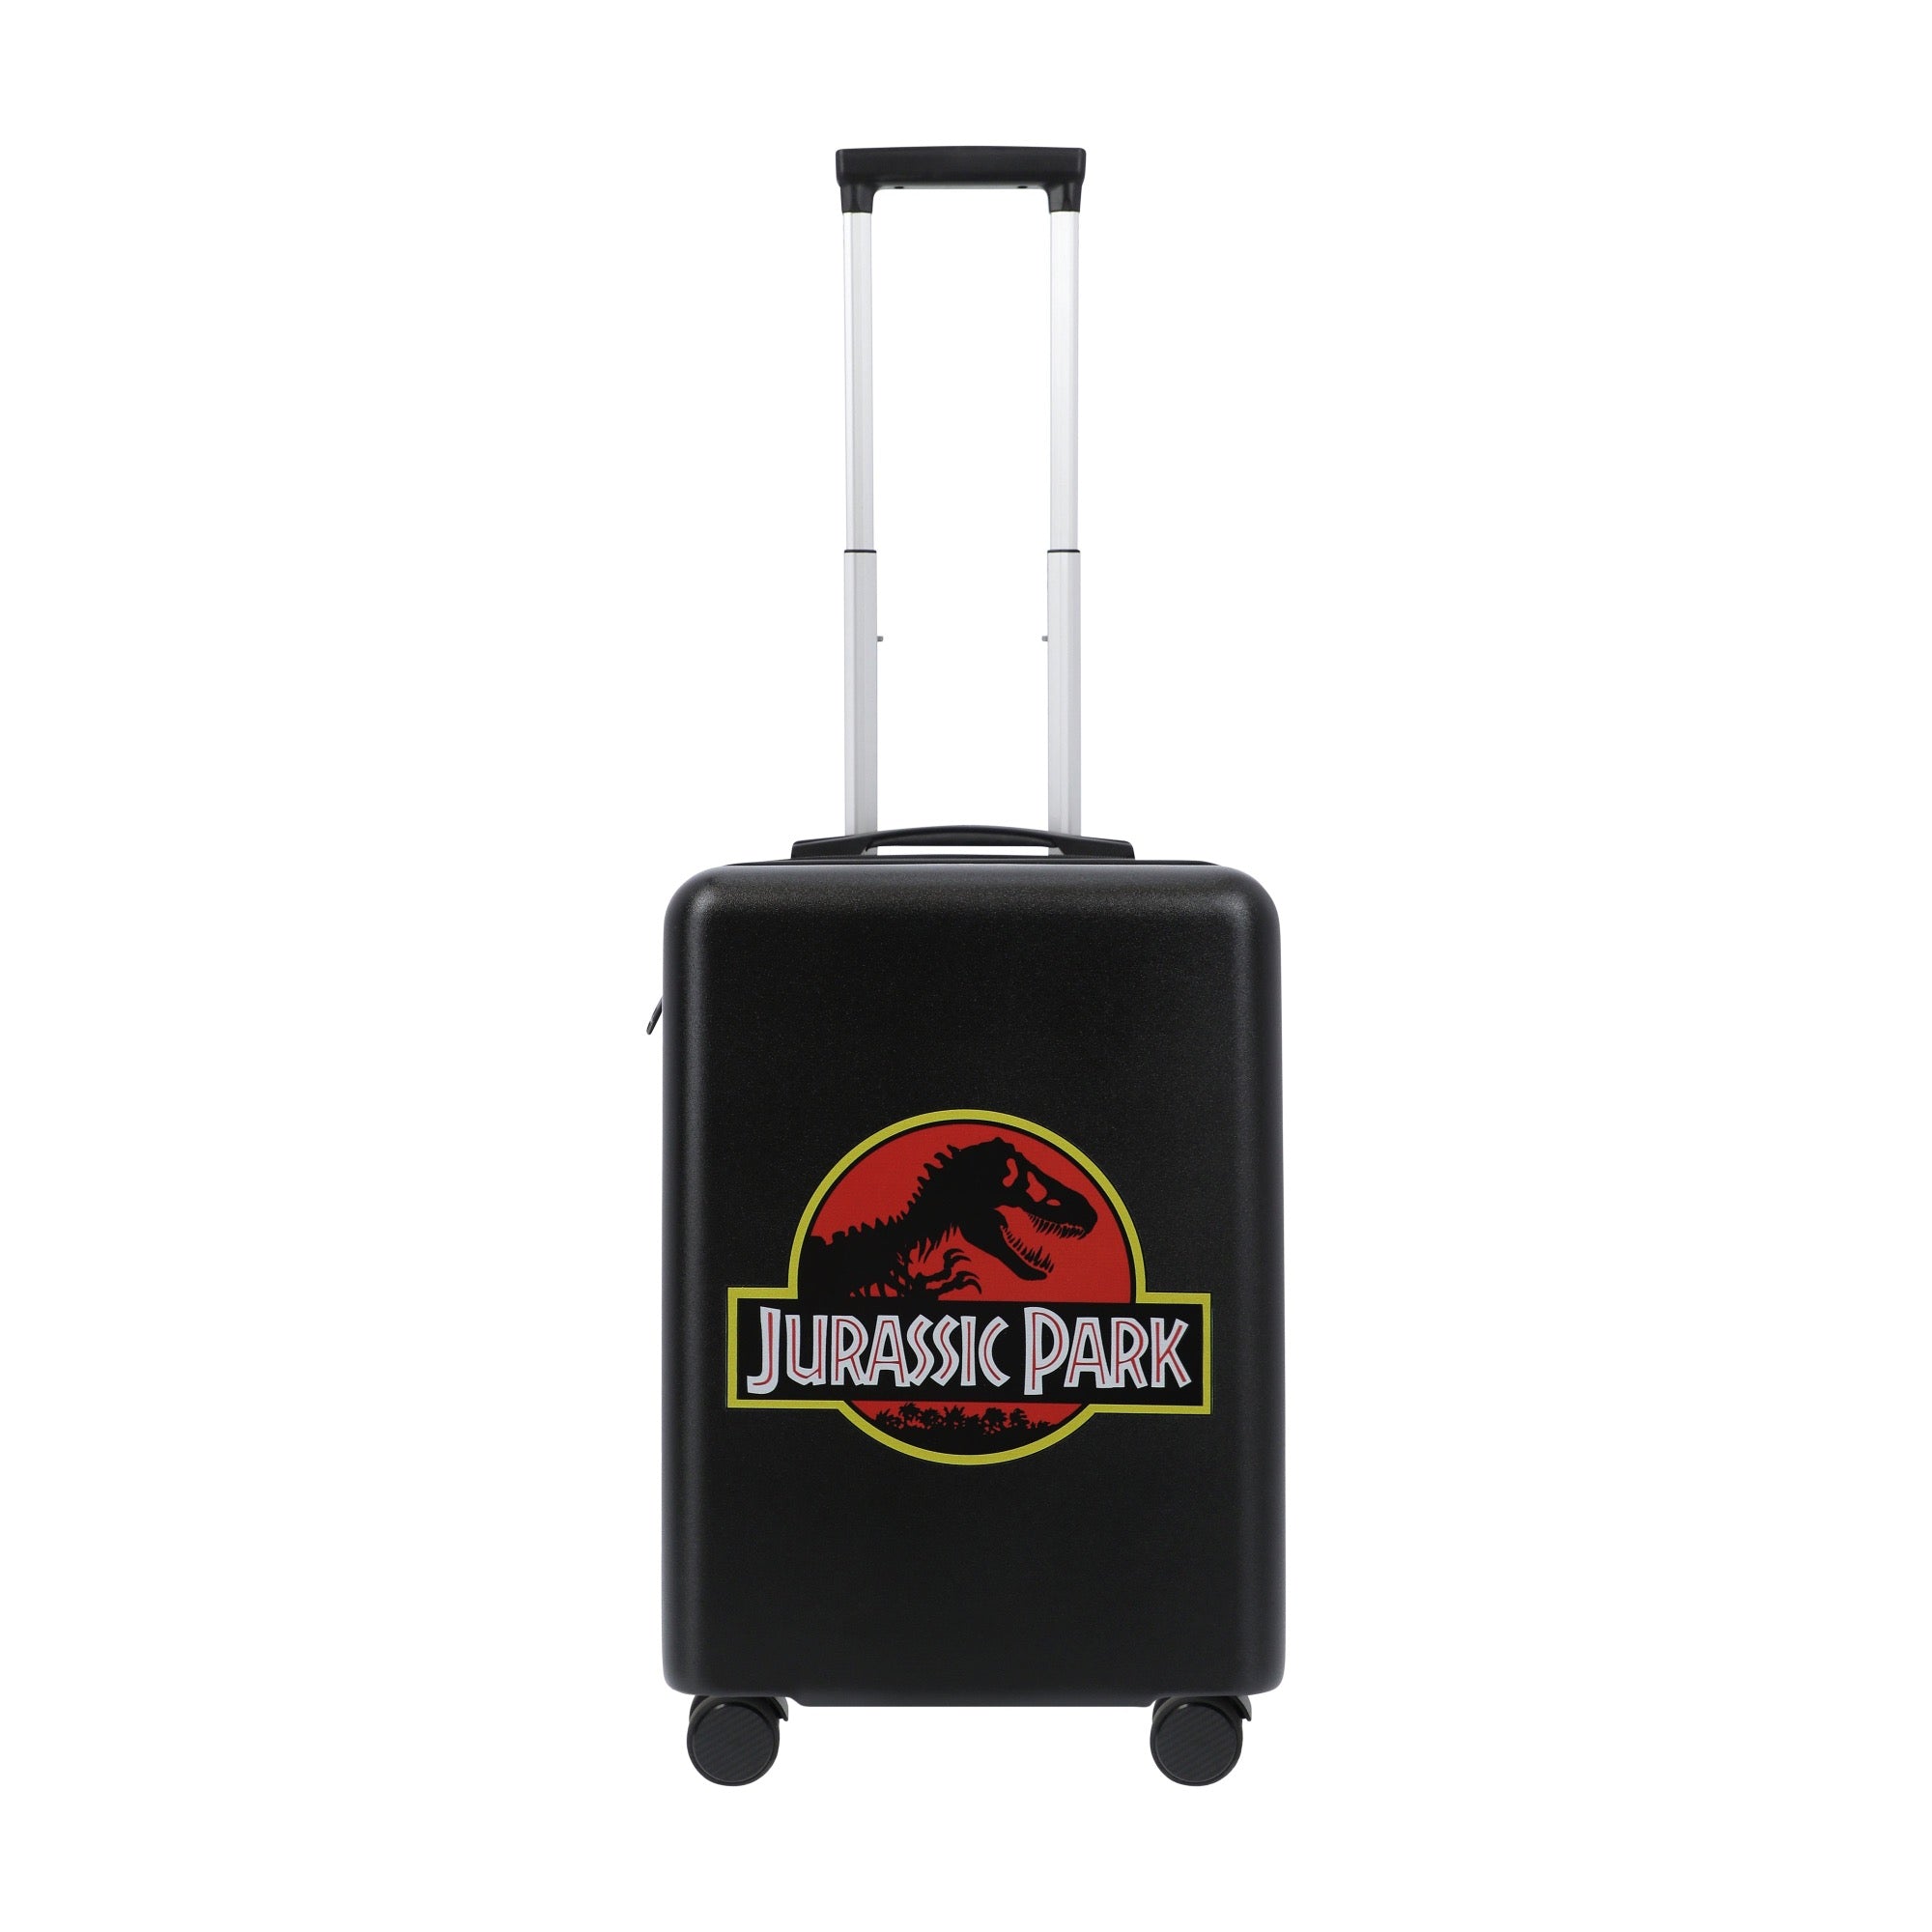 Black NBC studios jurassic park 22.5" carry-on spinner suitcase luggage by Ful